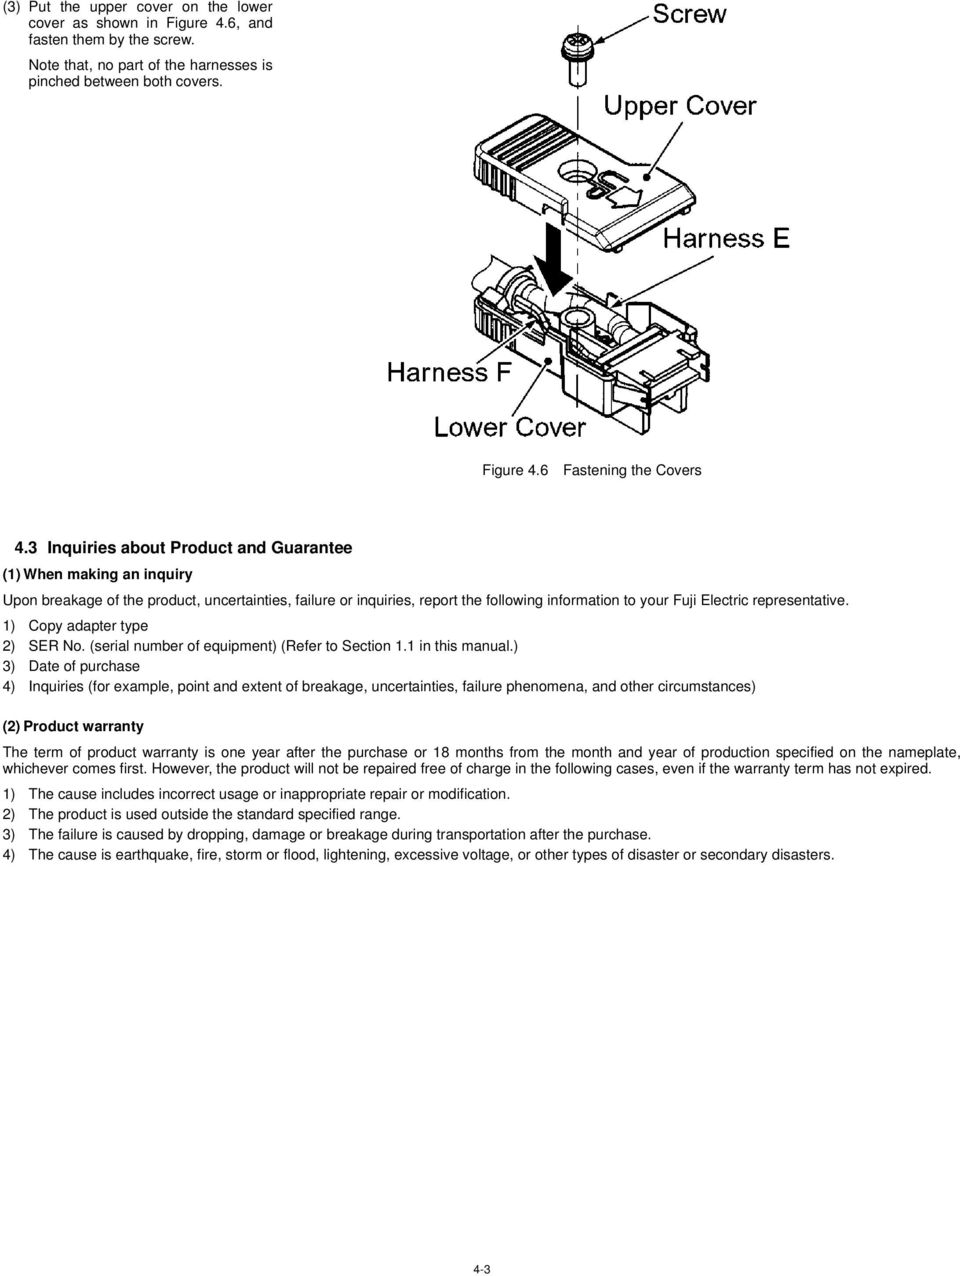 representative. 1) Copy adapter type 2) SER No. (serial number of equipment) (Refer to Section 1.1 in this manual.